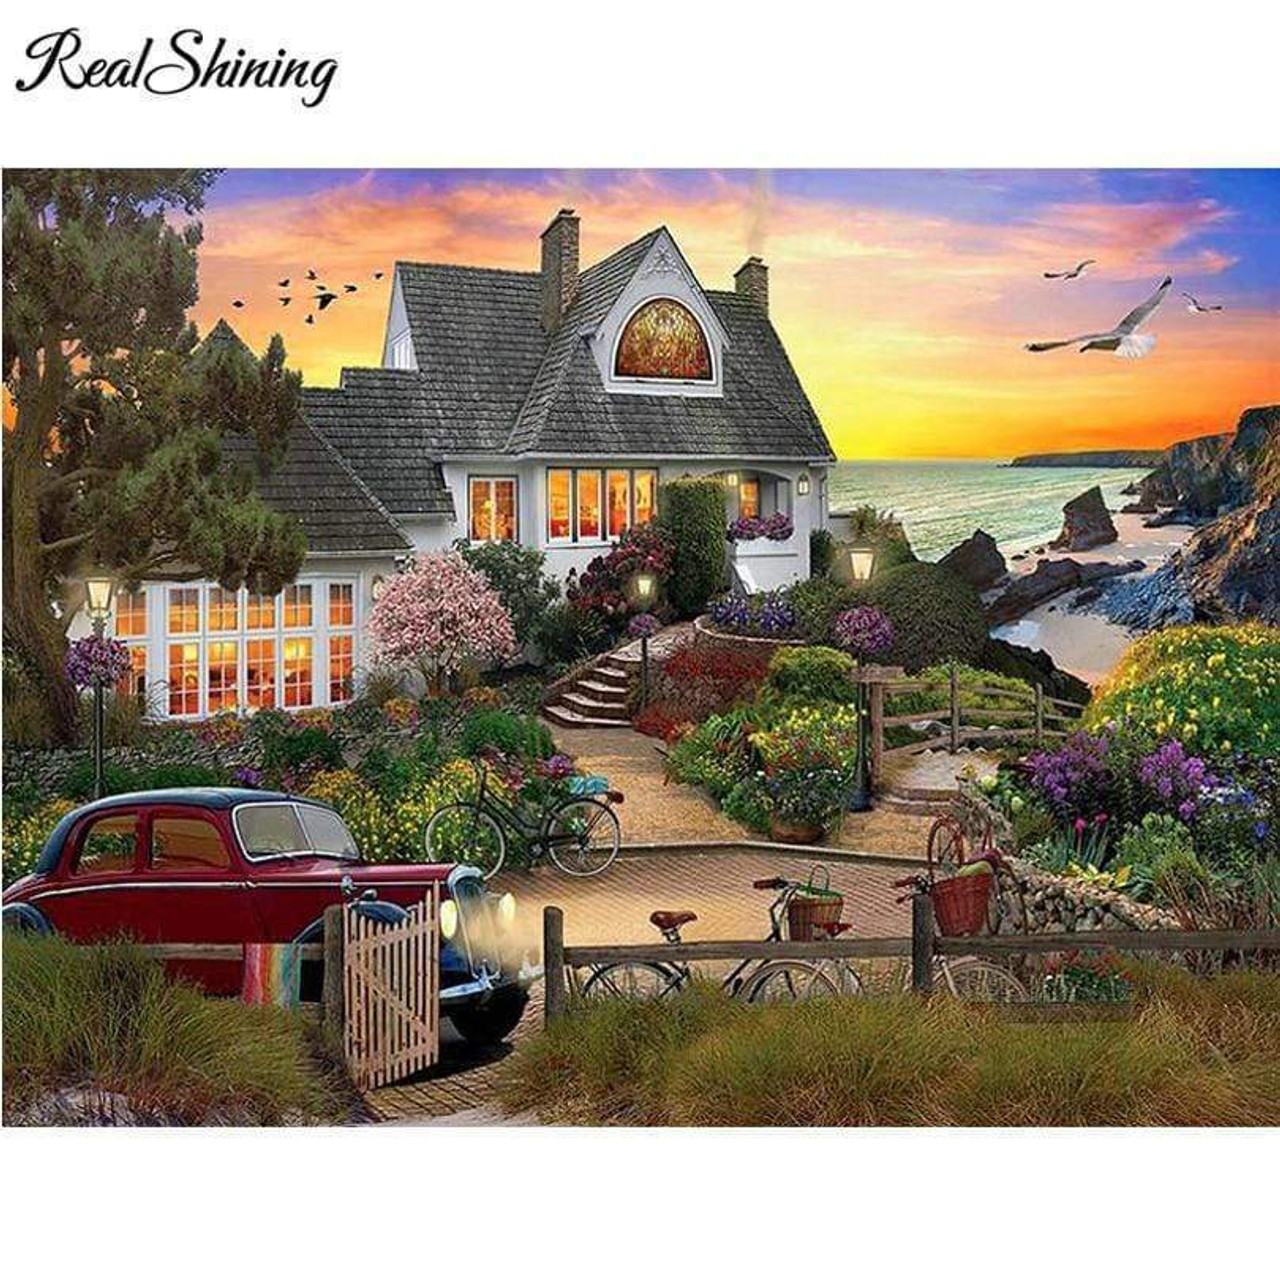 5D Diamond Painting House by the Shore Kit